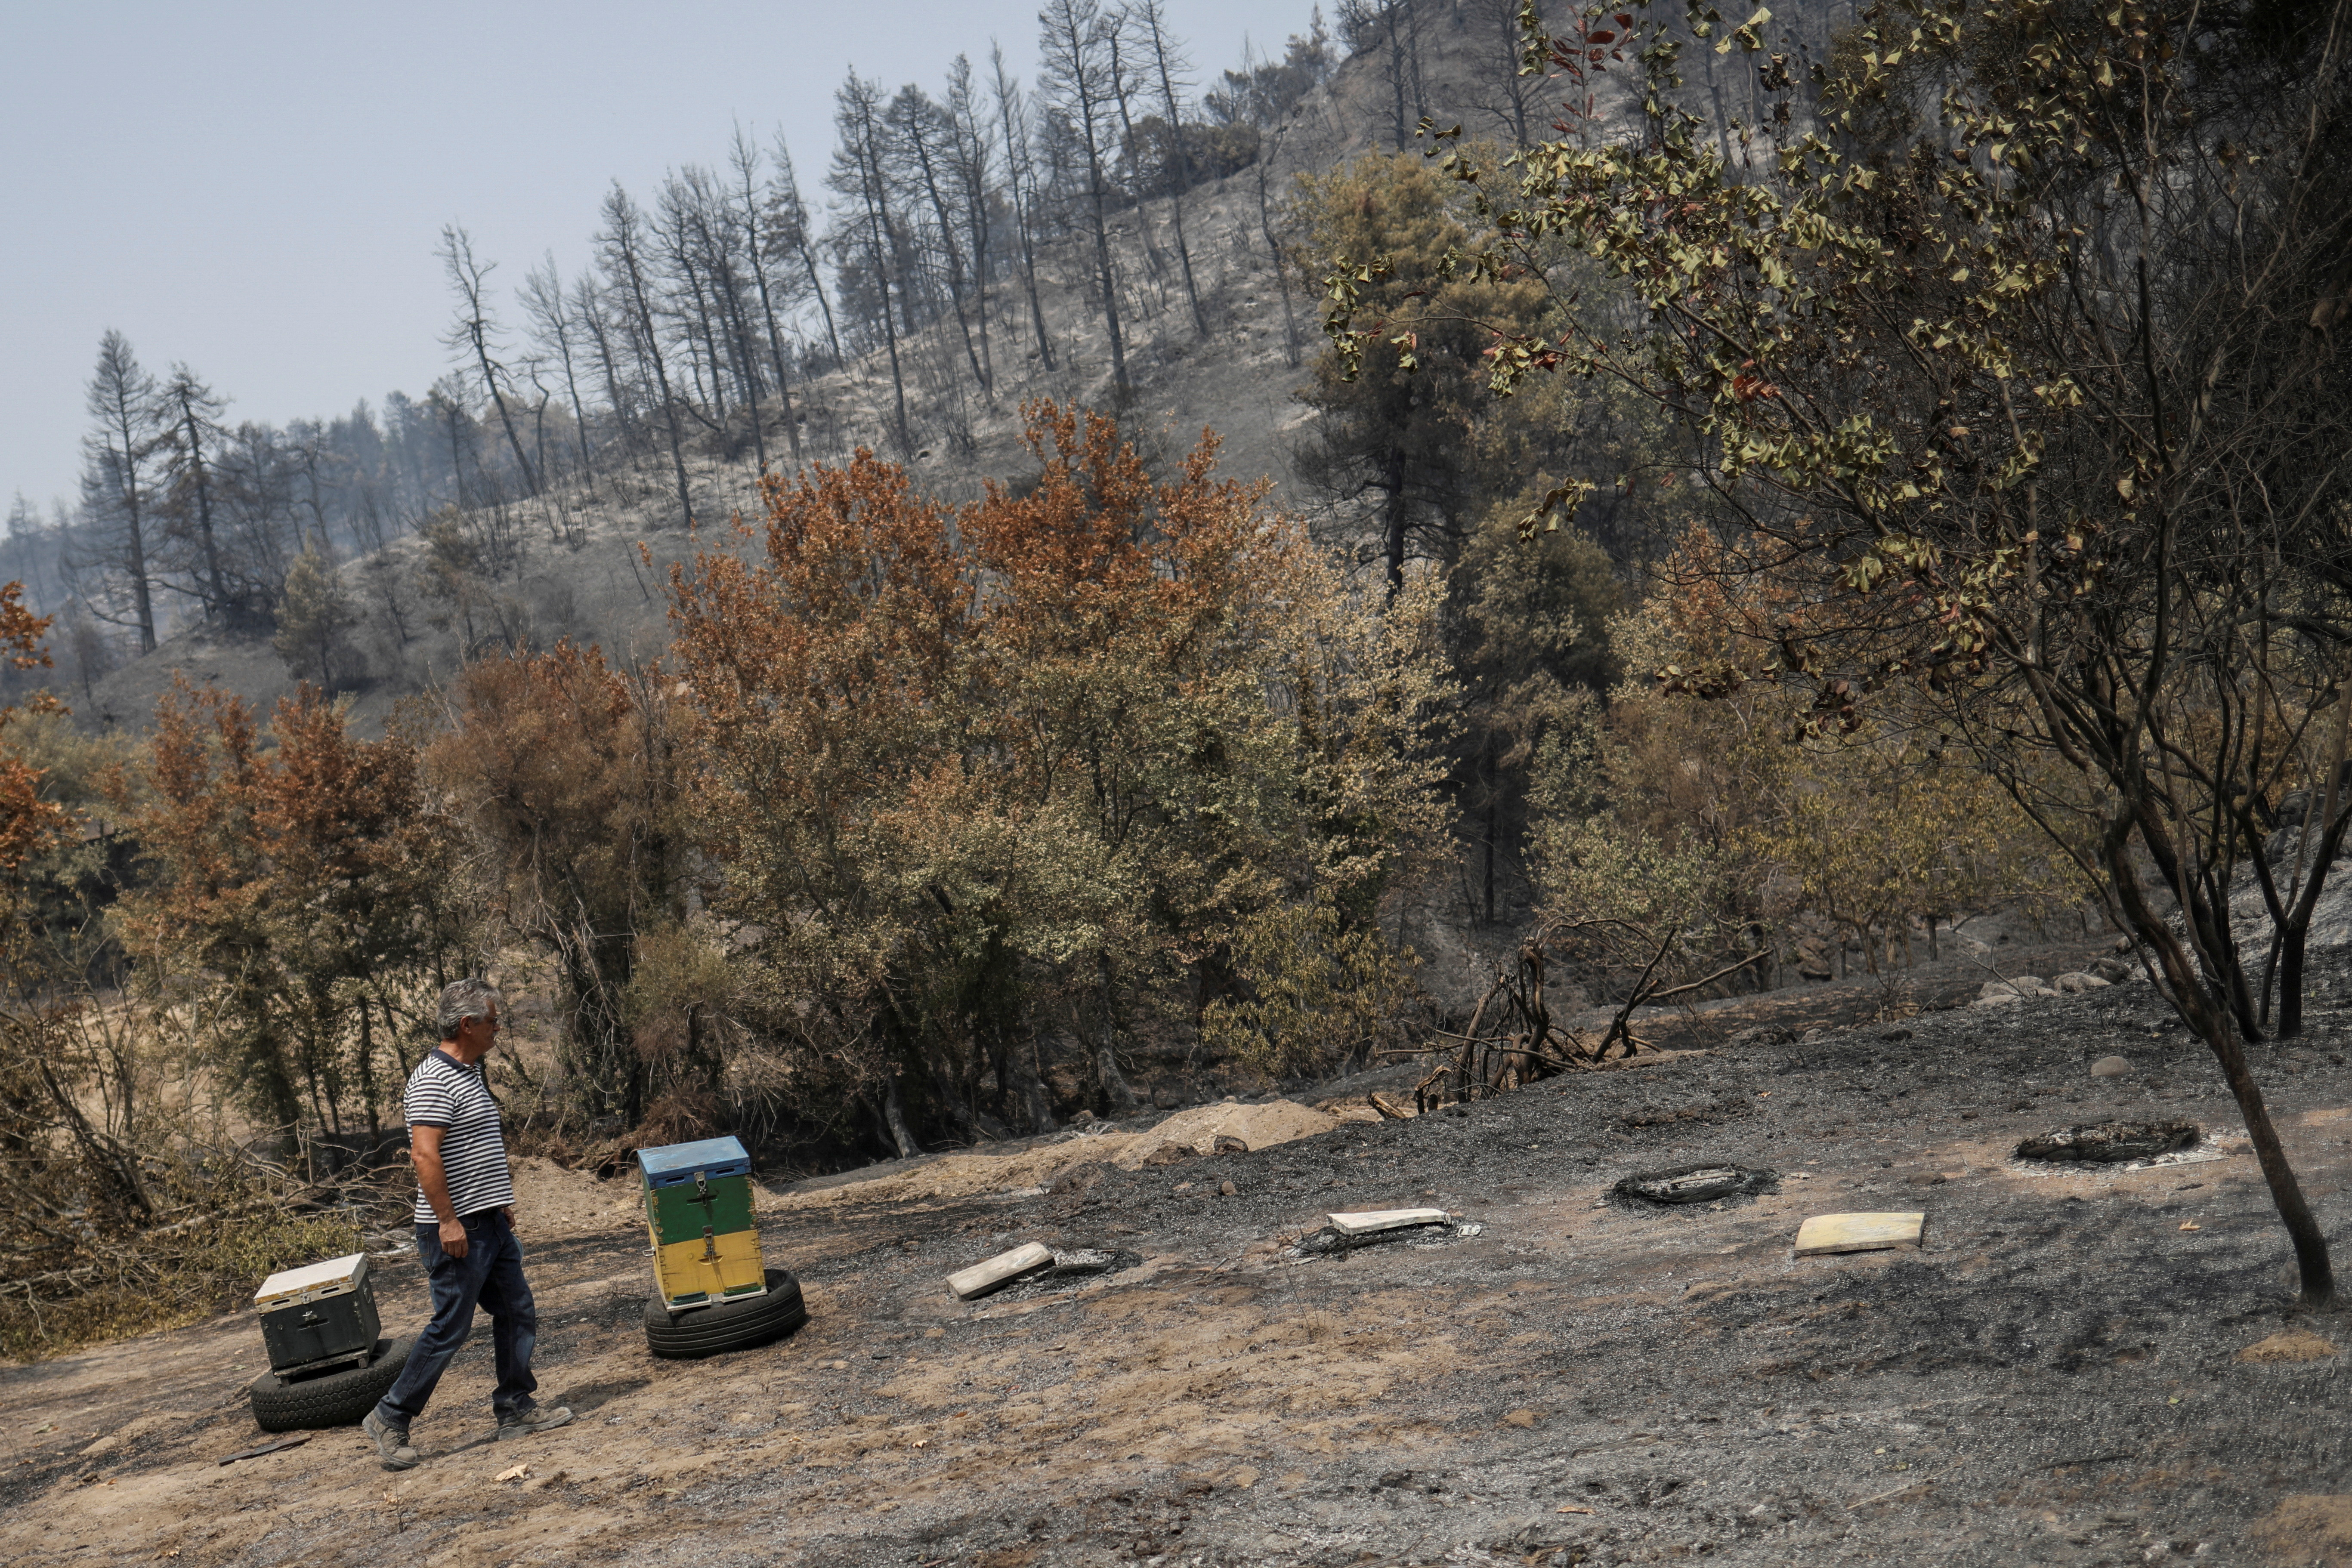 President of beekeepers of the municipality of Istiaia Stathis Albanis, walks next to destroyed beehives, following a wildfire near the village of Voutas on the island of Evia